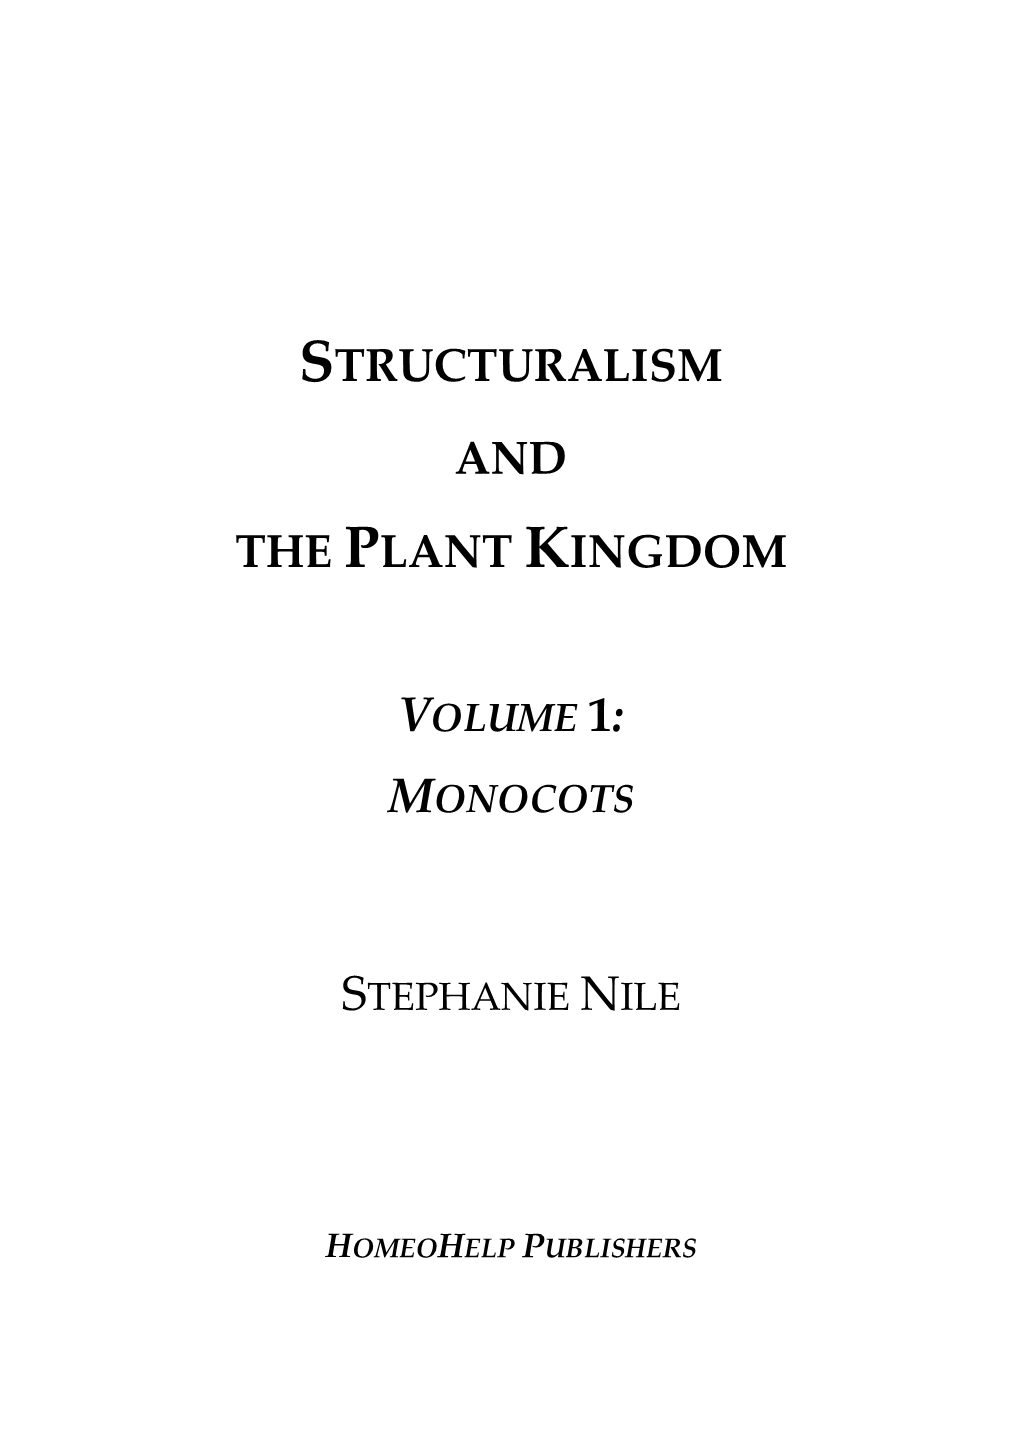 Structuralism and the Plant Kingdom